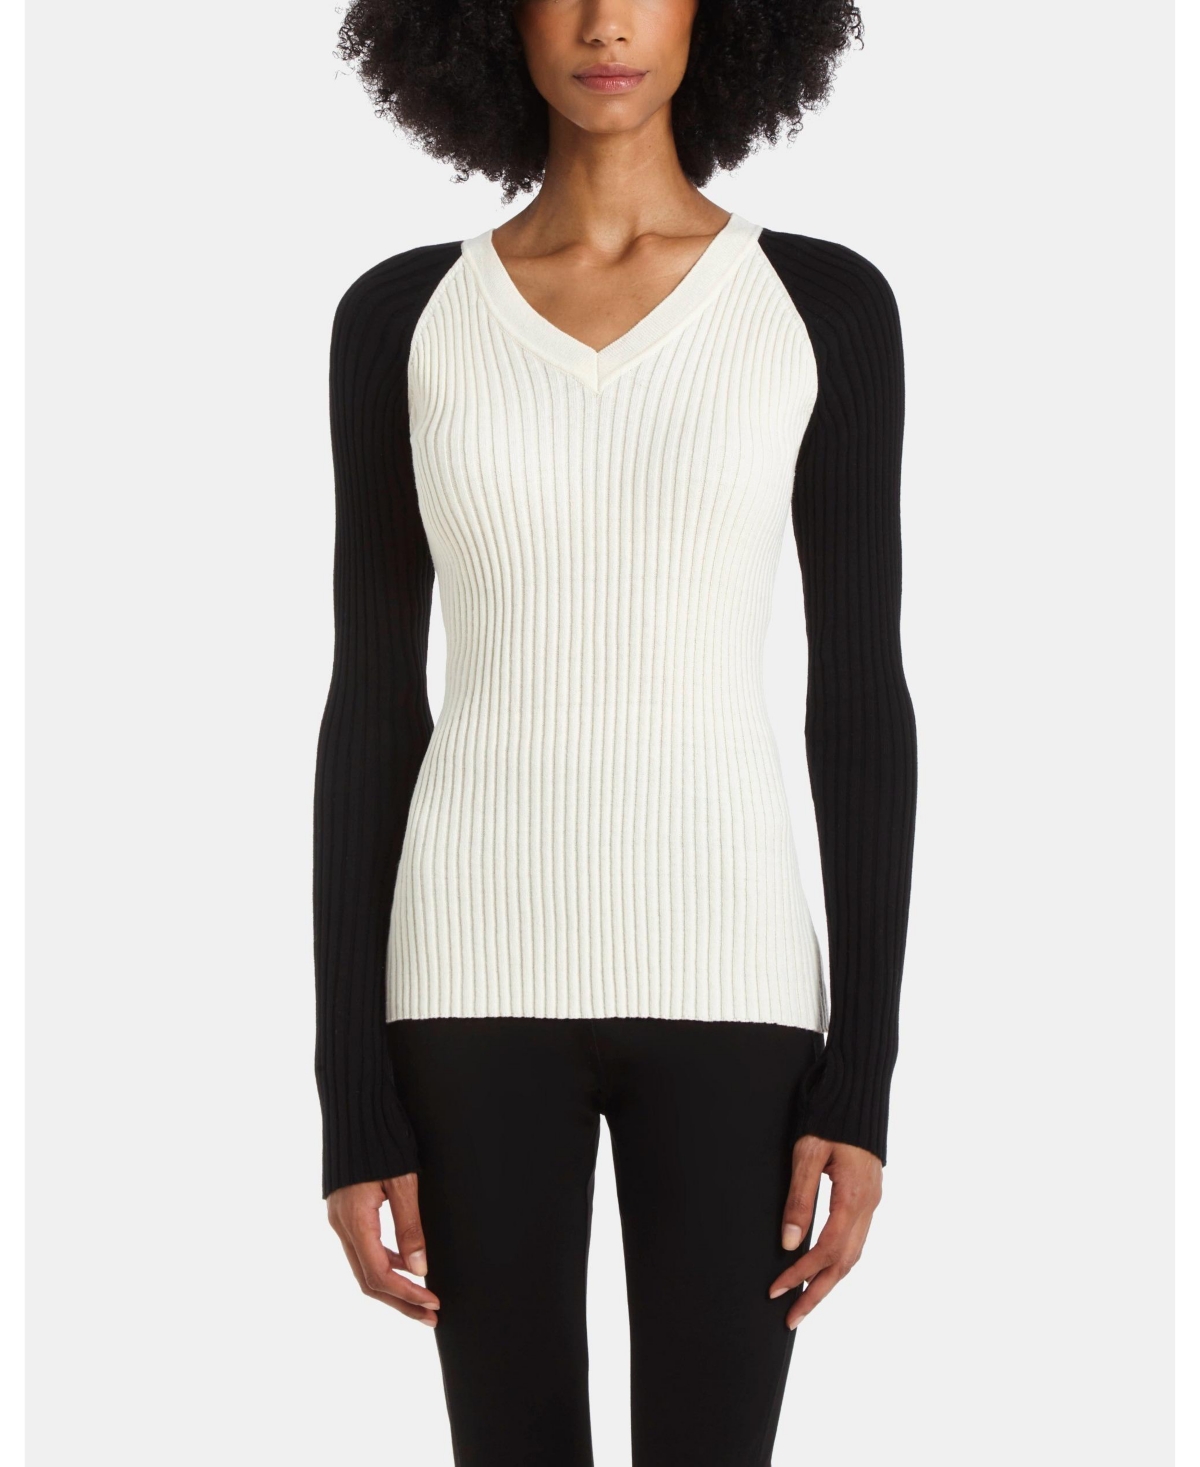 CAPSULE 121 WOMEN'S V-NECK SCOUT SWEATER